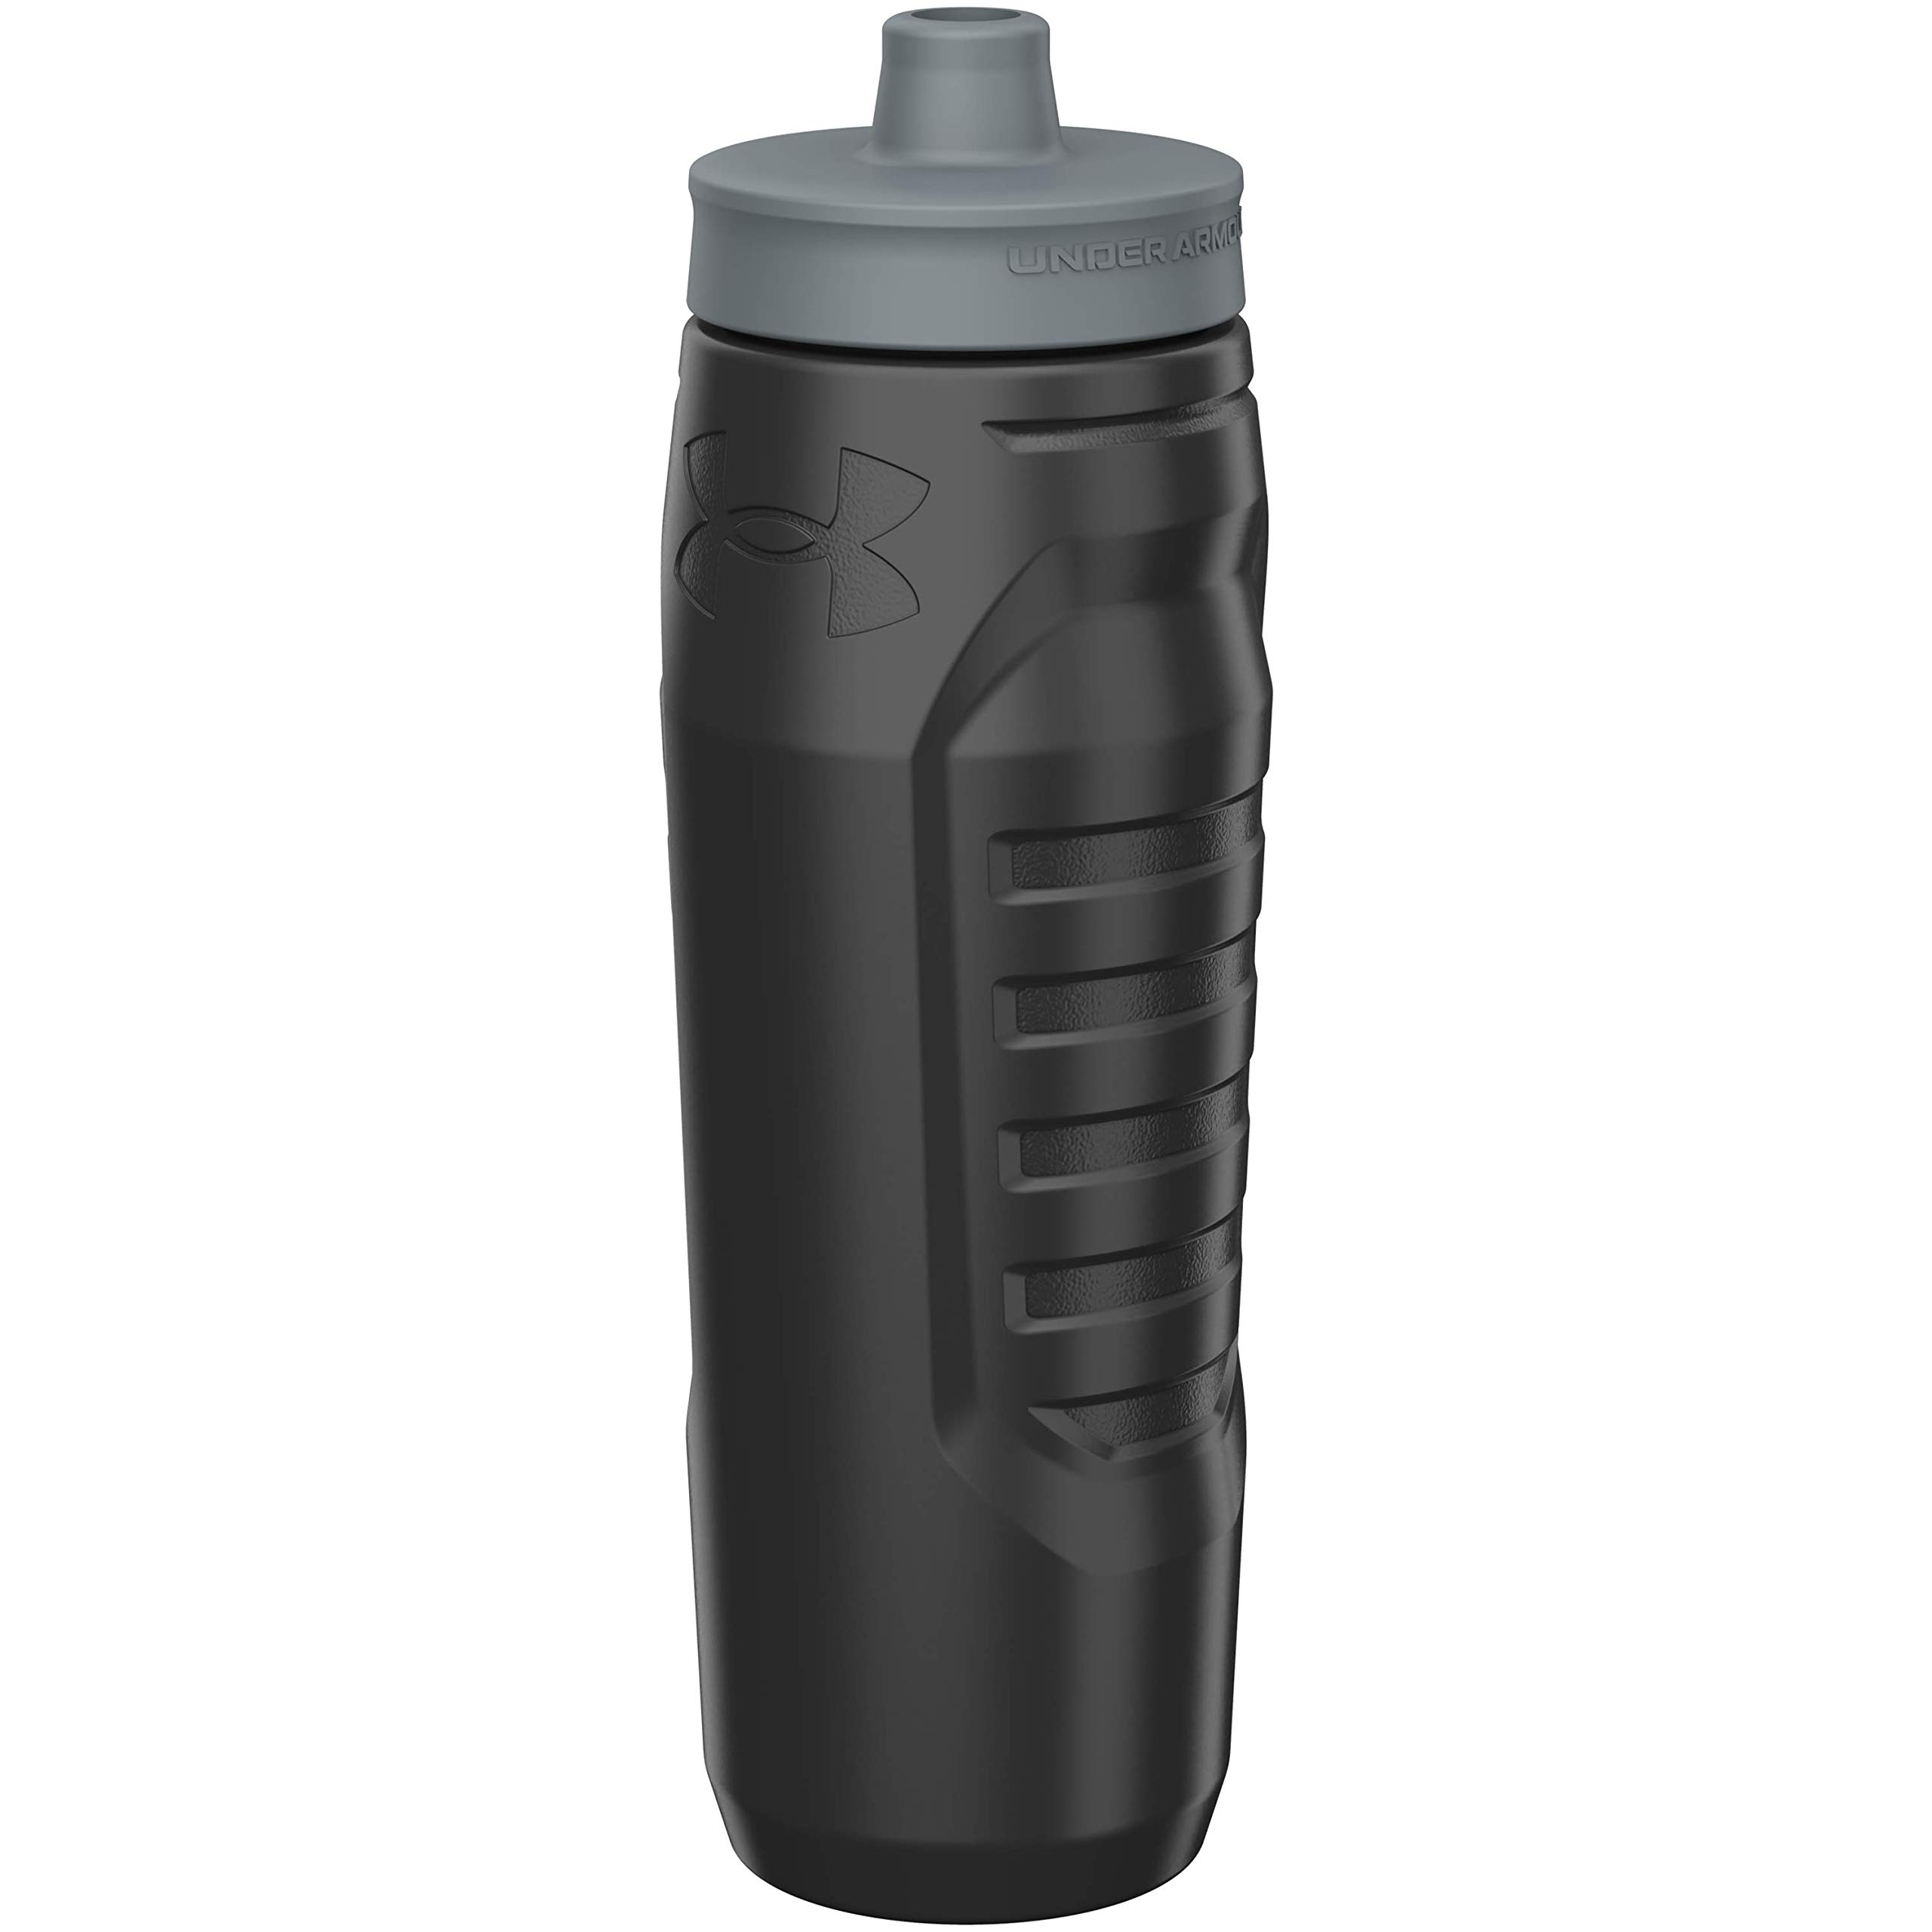 Under Armour Sideline Squeeze Water Bottle, Designed with Quick-Shot Lid, Quick & Easy Hydration, 32 oz